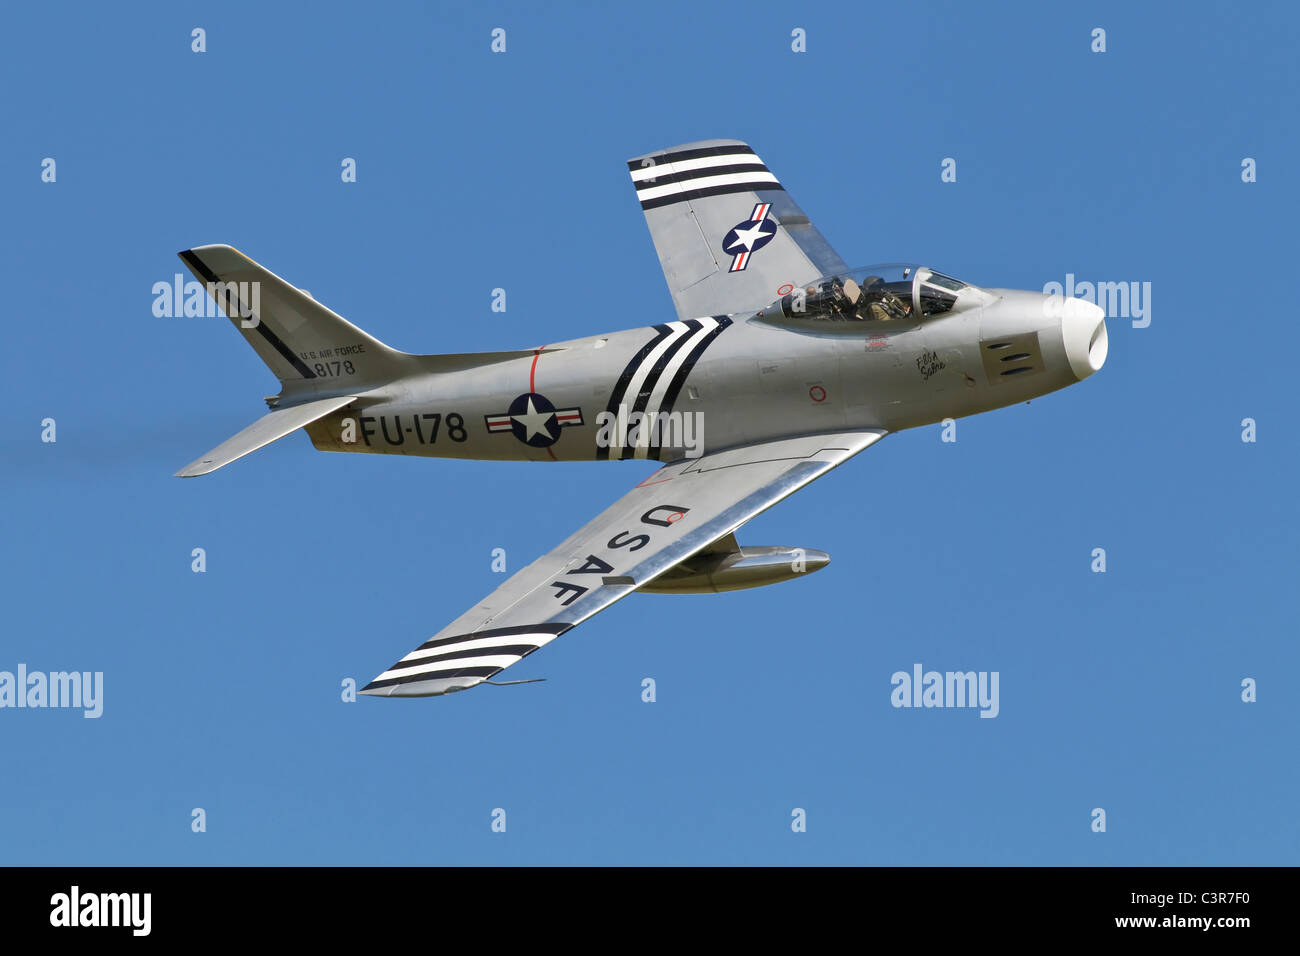 A classic veteran jet fighter of the USAF - The North American F86 Sabre fighter in flight Stock Photo